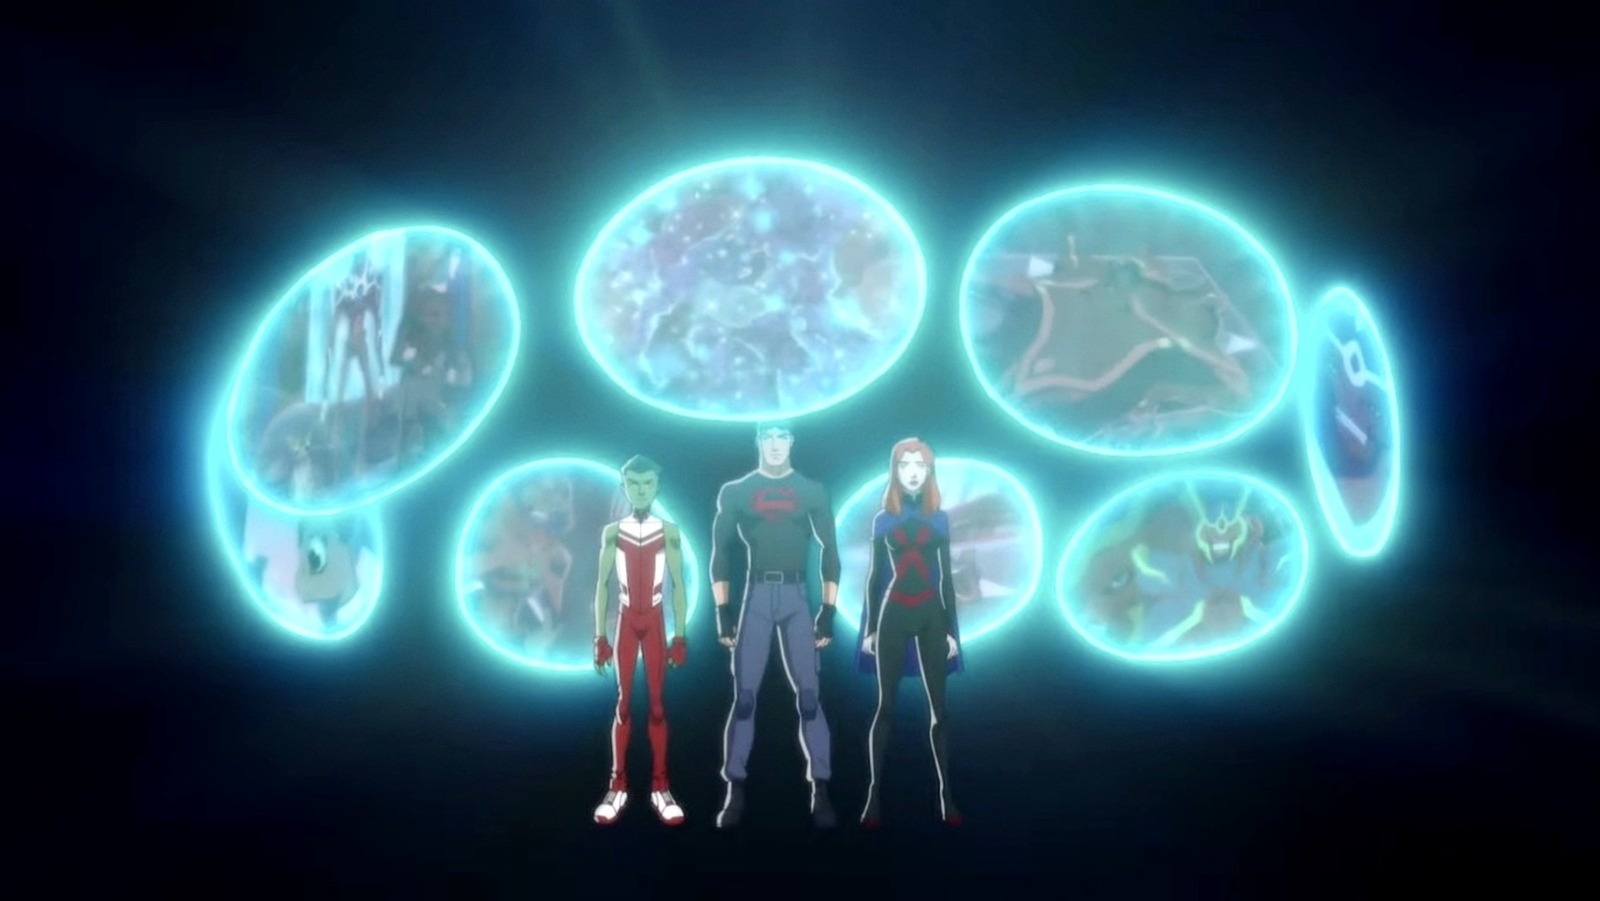 Young Justice: Phantoms Trailer: The Beloved Animated Series Returns